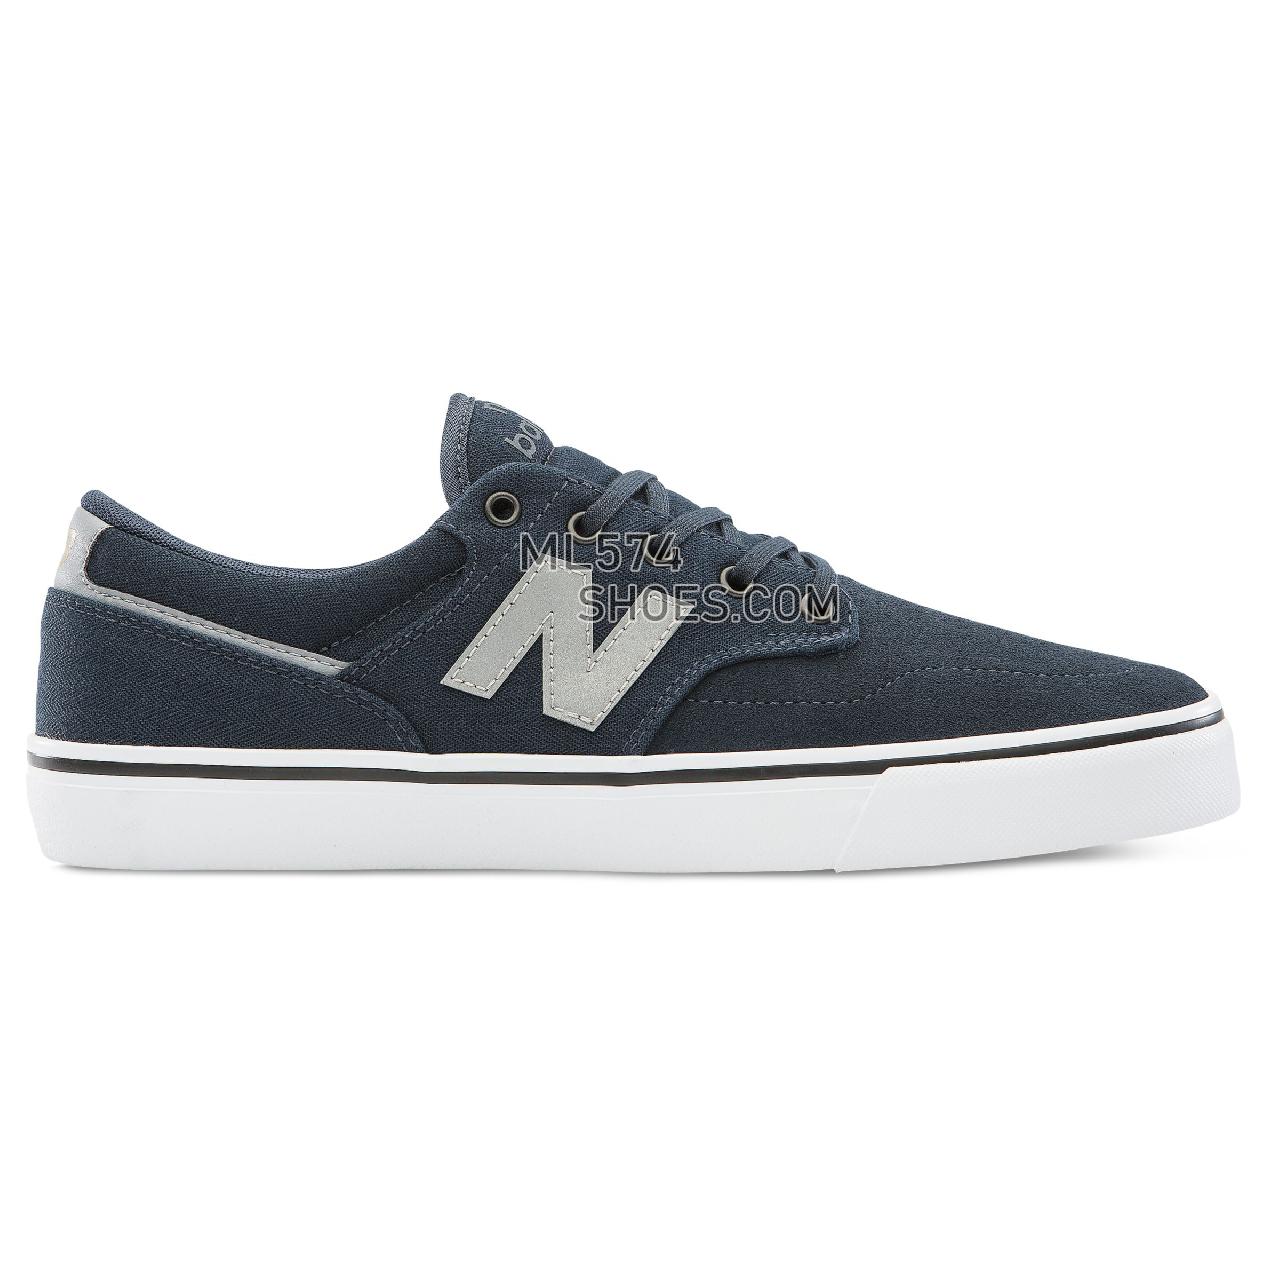 New Balance 331 - Men's 331 - Classic Navy with White - AM331RME